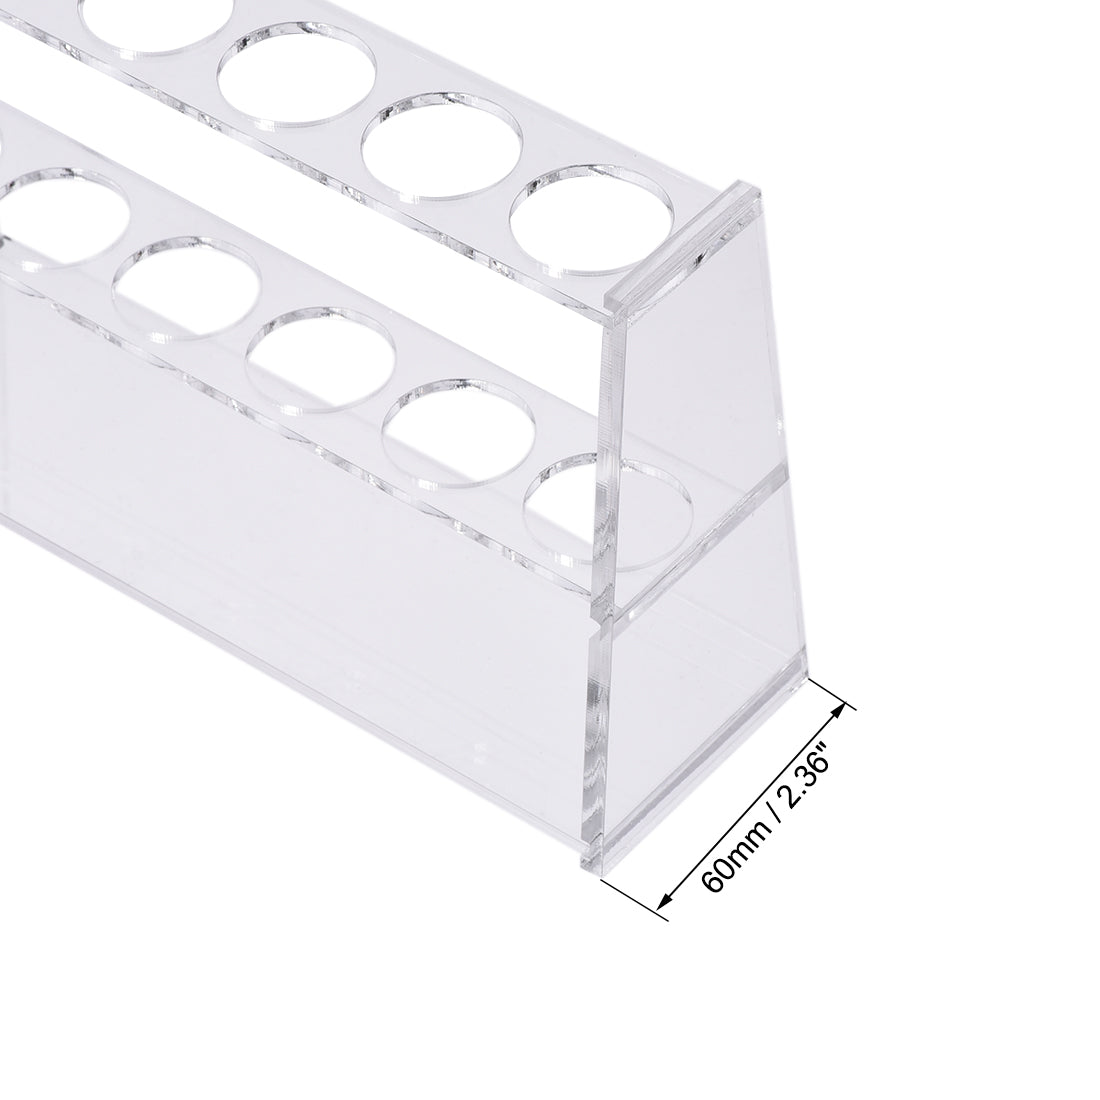 uxcell Uxcell Acrylic Test Tube Holder Rack 6 Wells for 50ml Centrifuge Tubes Clear